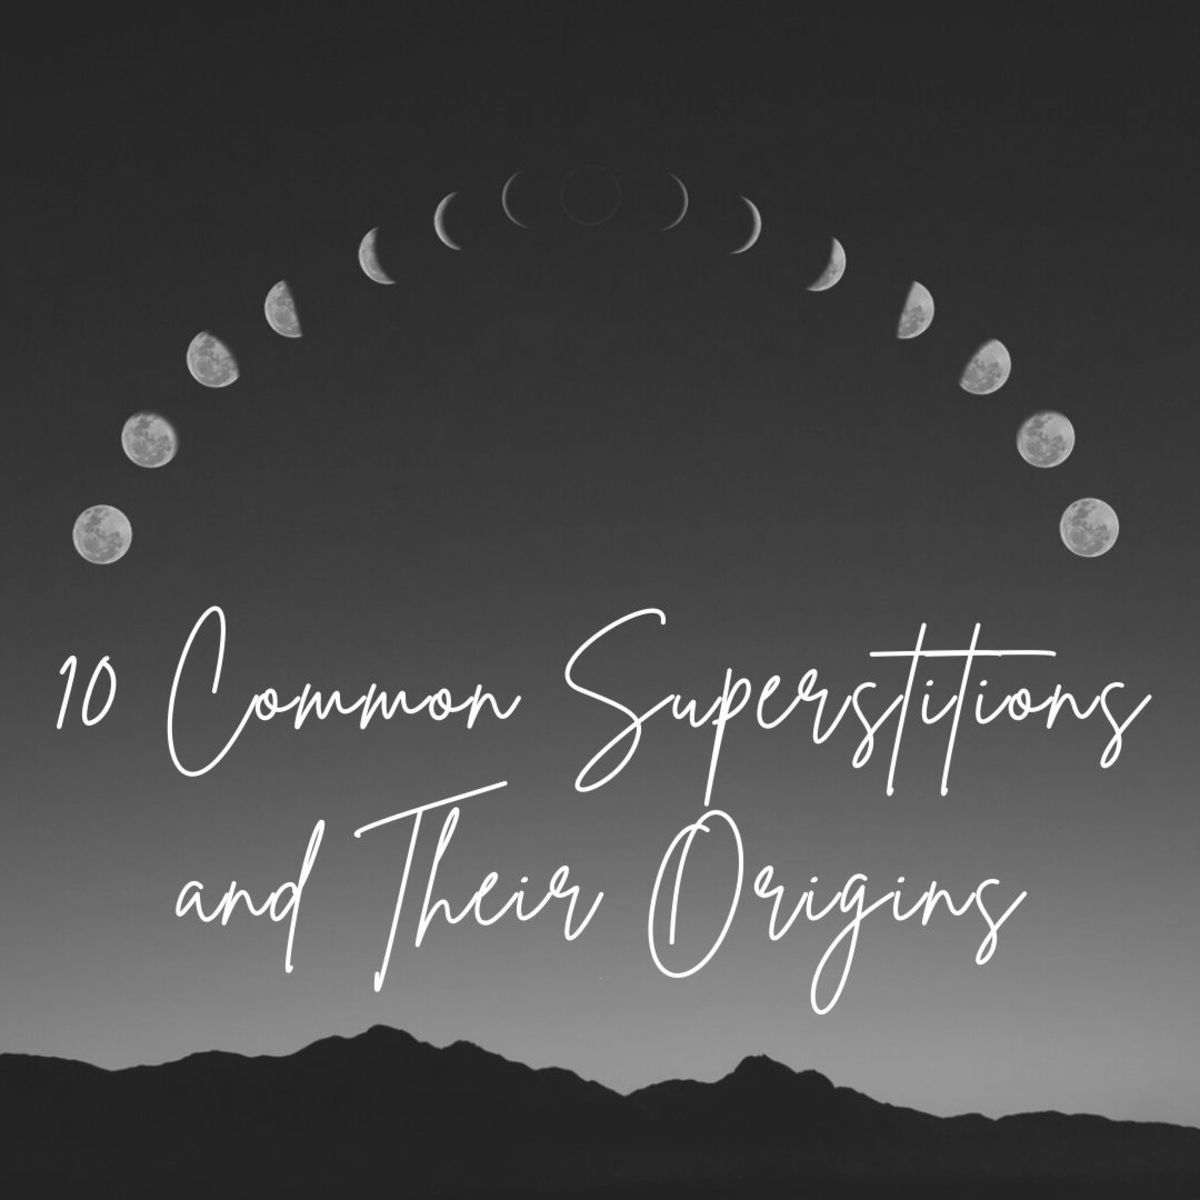 10 Superstitions and Their Meanings